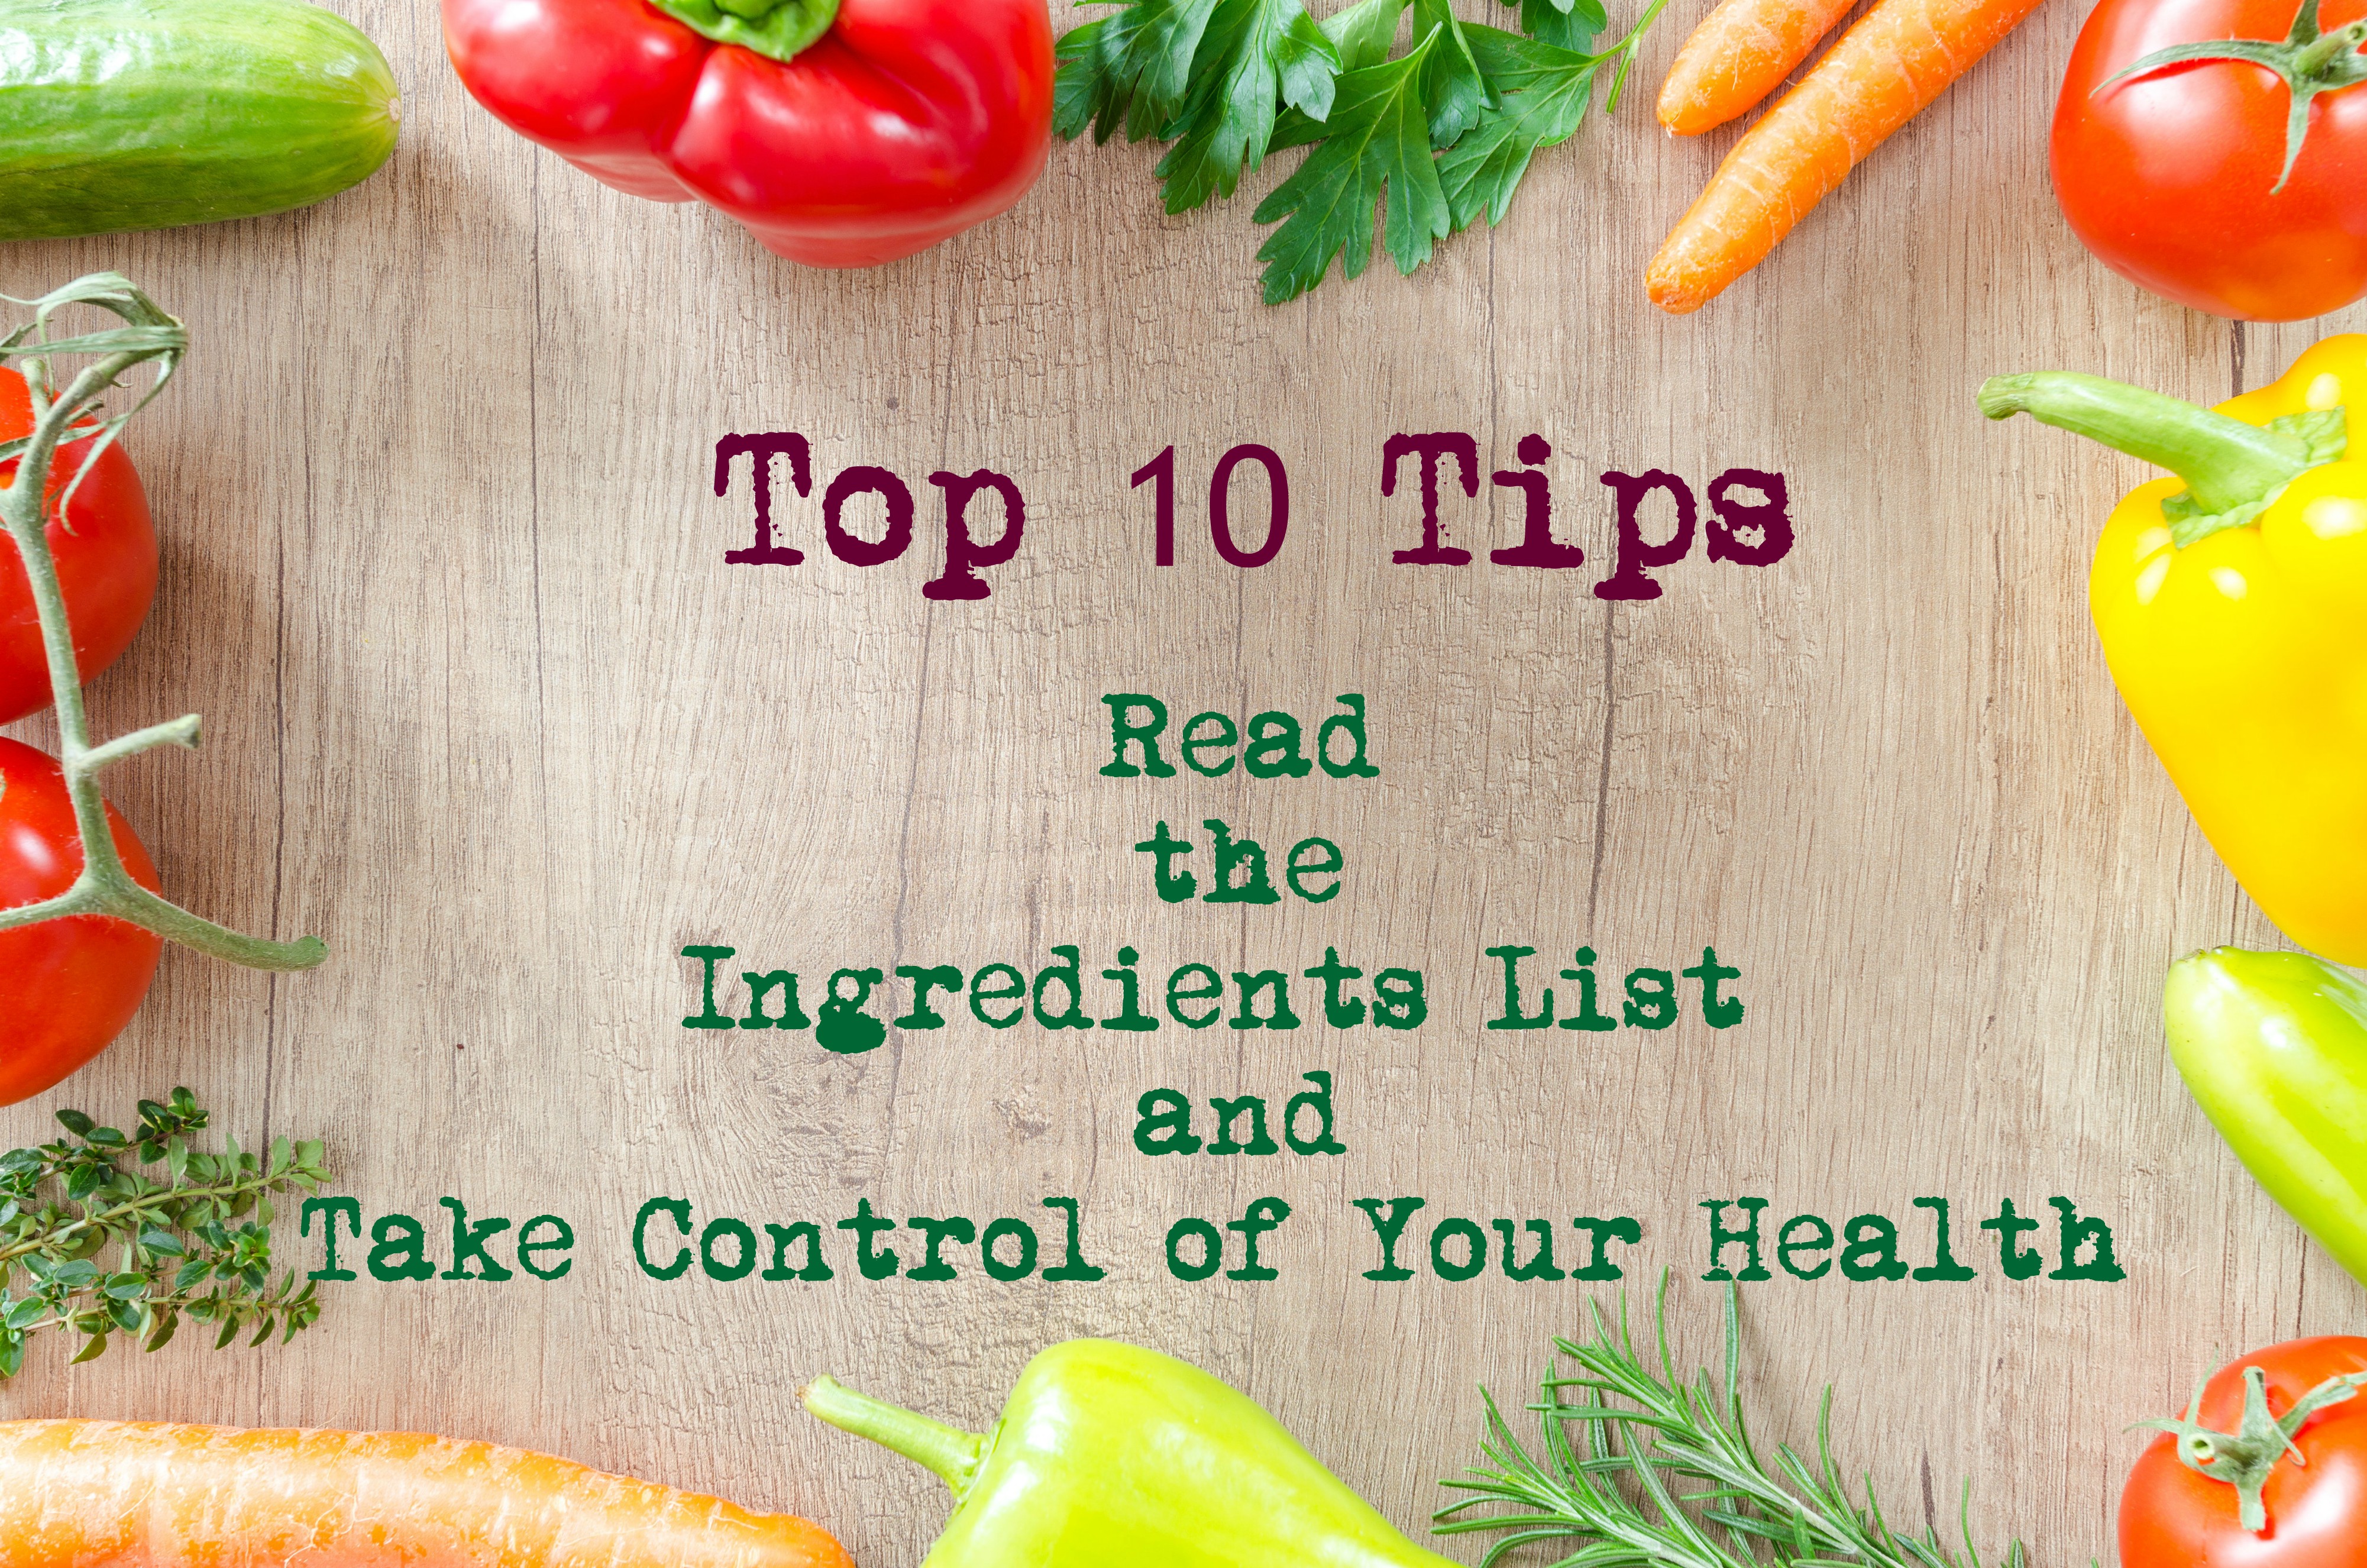 Top 10 Tips to Read the Ingredients List and Control Your Health